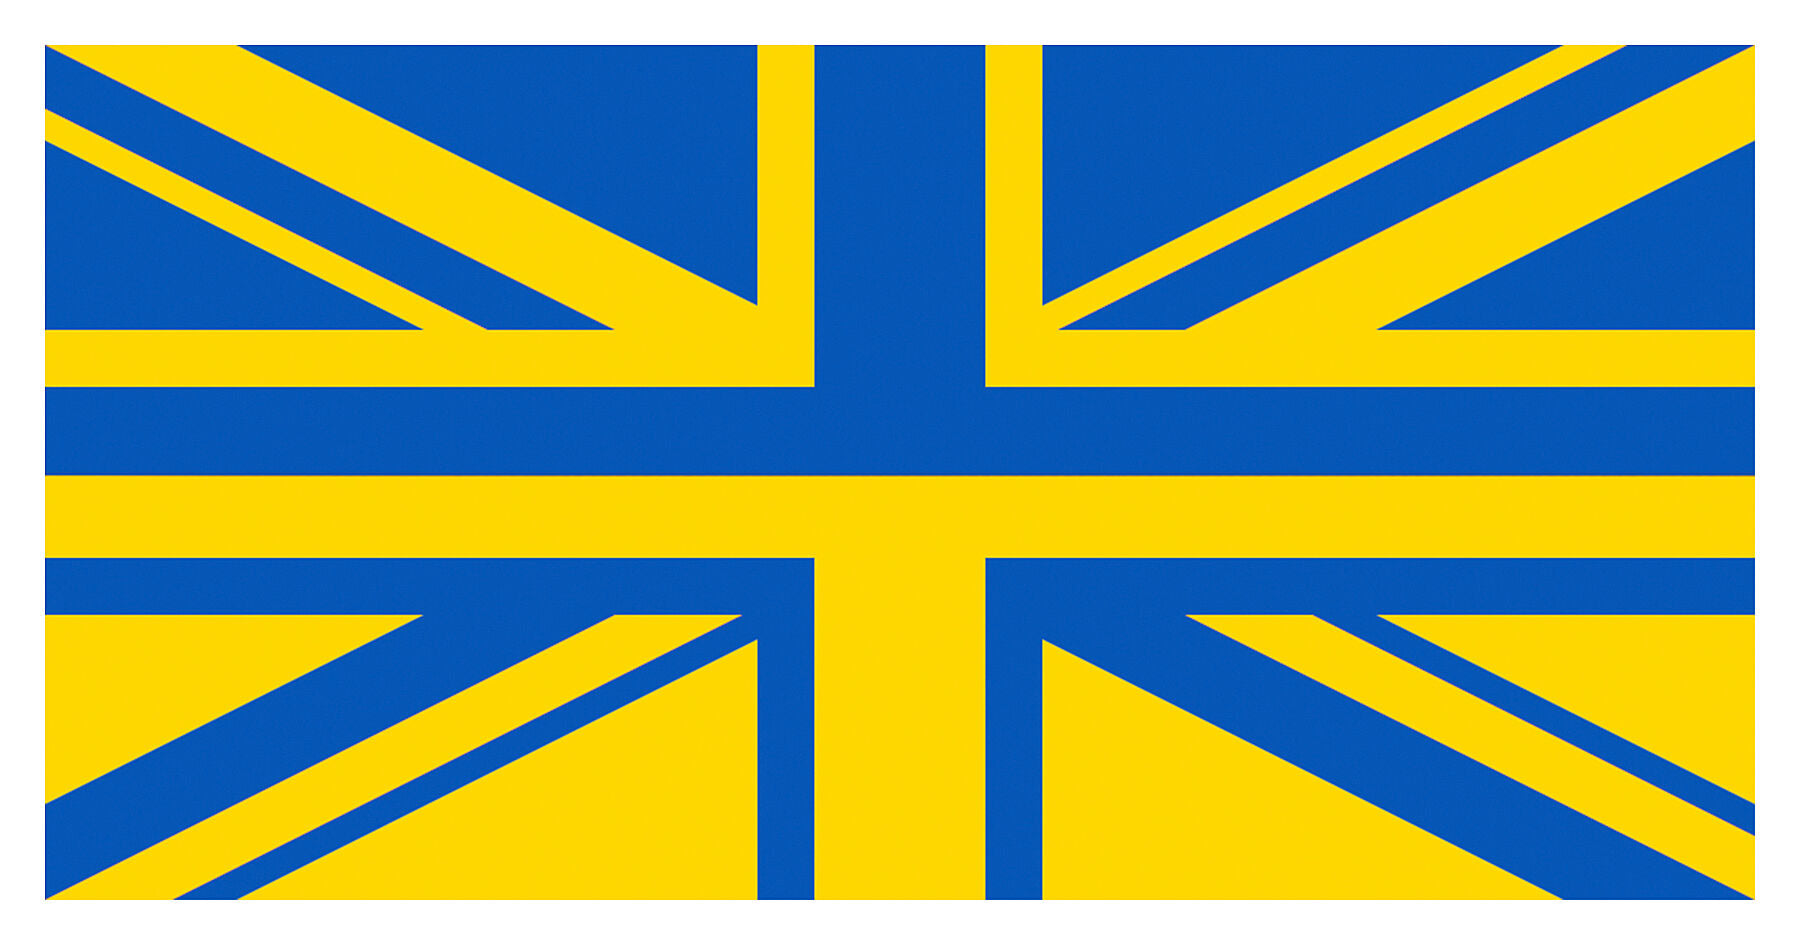 A combination of the Ukrainian flag and the Union flag in the yellow and blue colours of the Ukraine